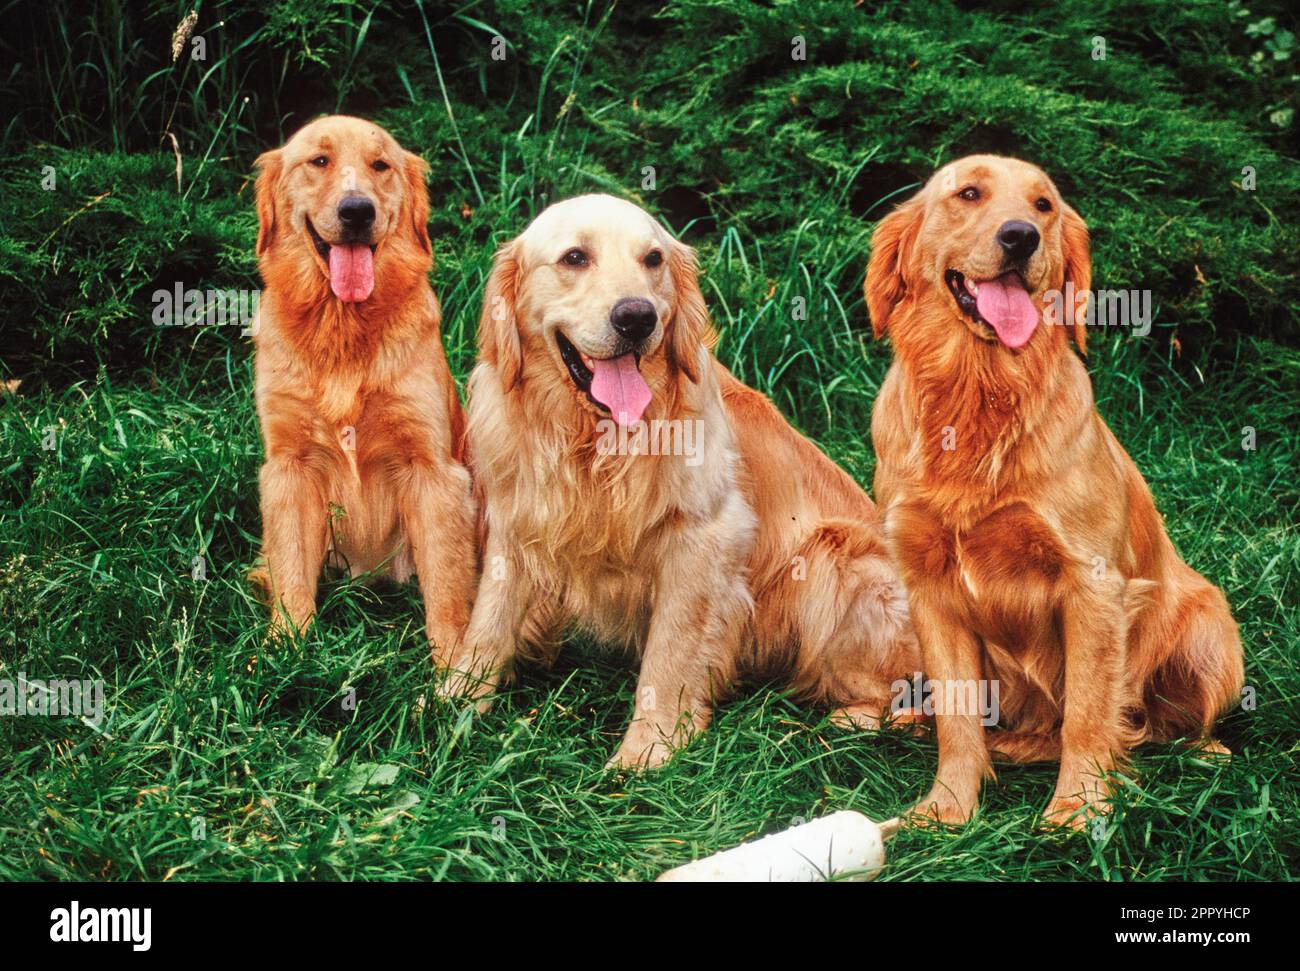 Three happy golden retrievers sitting outside in long grass Stock Photo